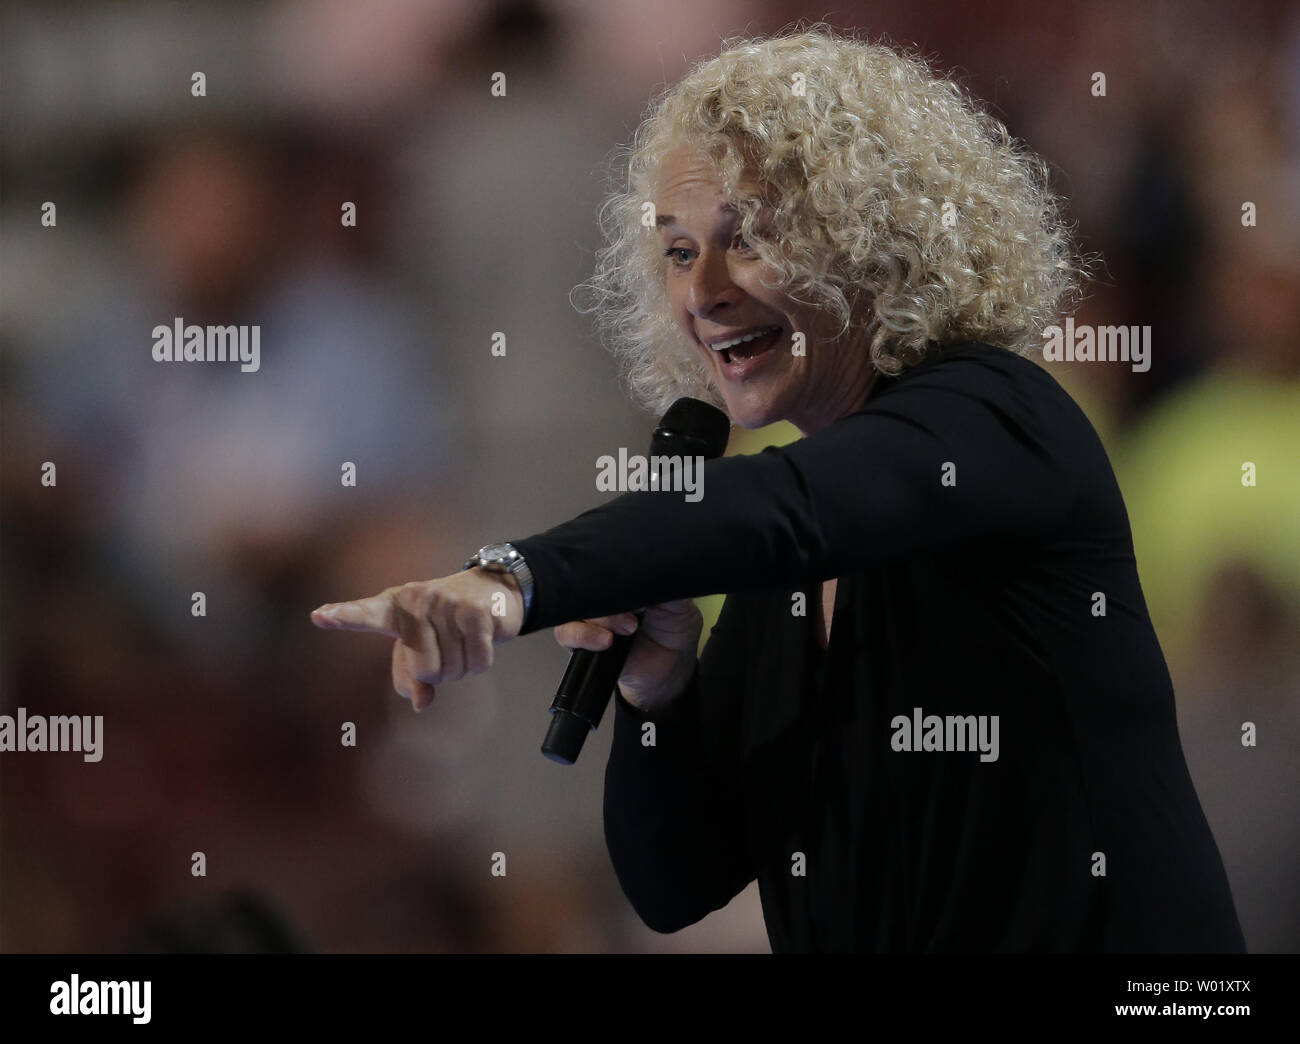 Singer Carole King rehearses during Day four of the Democratic National Convention at Wells Fargo Center in Philadelphia, Pennsylvania on July 28, 2016.  Democrat Hillary Clinton will face Republican Donald Trump in the national election.   Photo by Ray Stubblebine/UPI Stock Photo